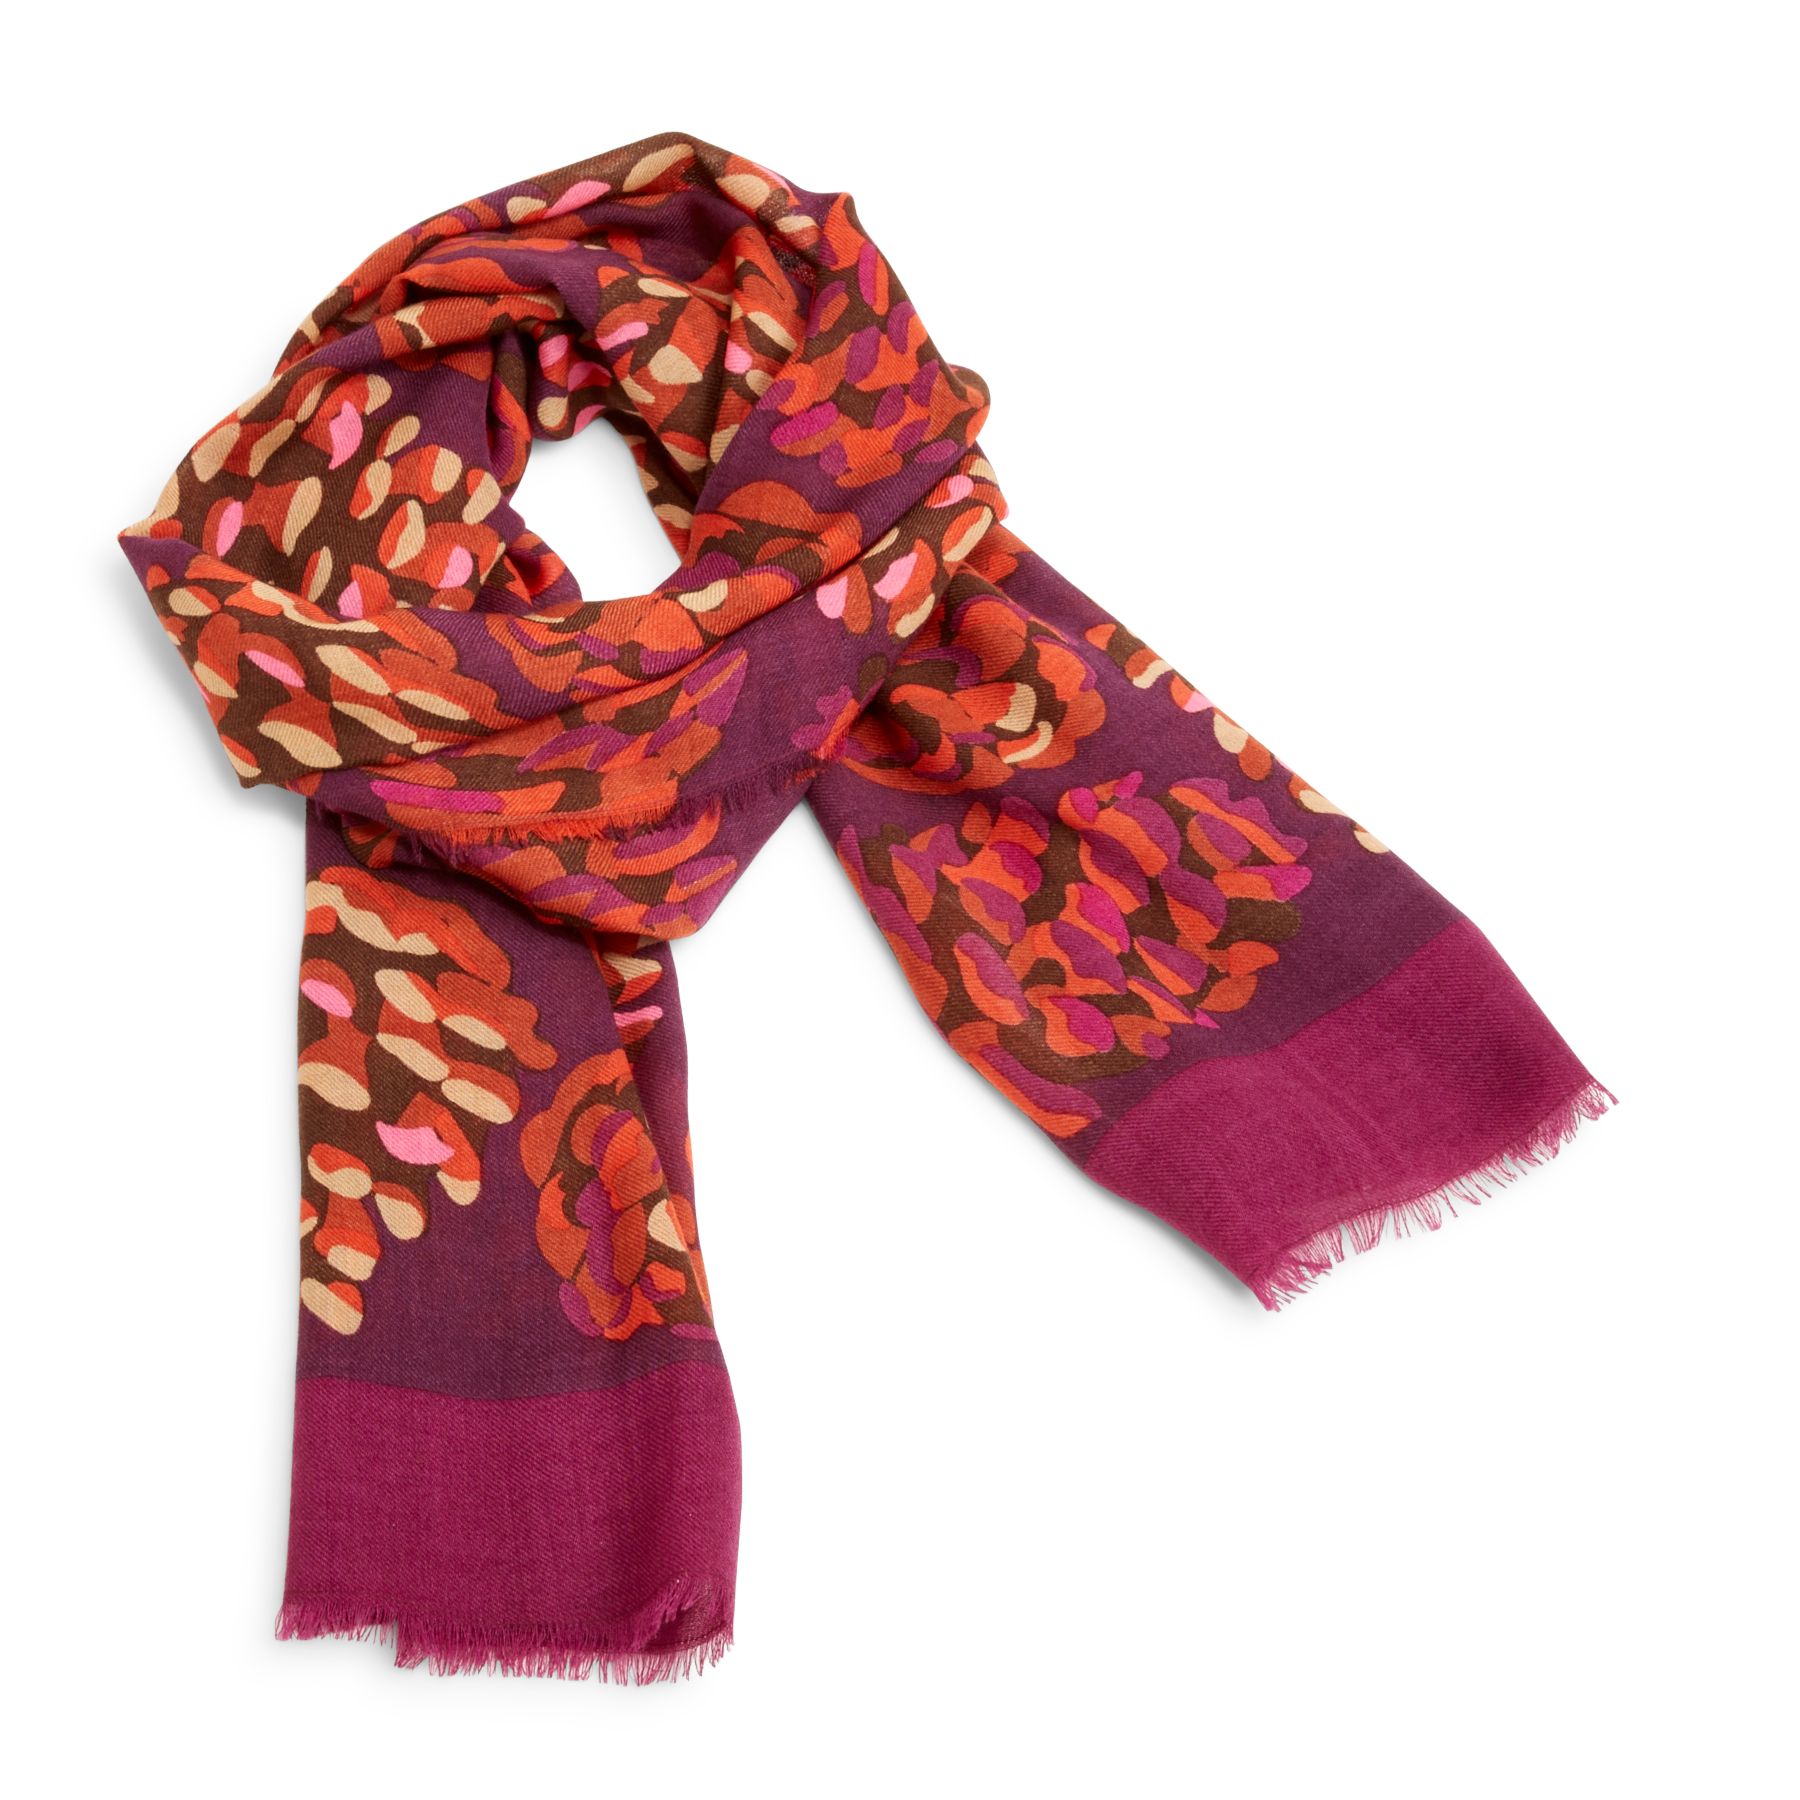 Vera Bradley Soft Wool Scarf in Rosewood PineconesFashion Scarves